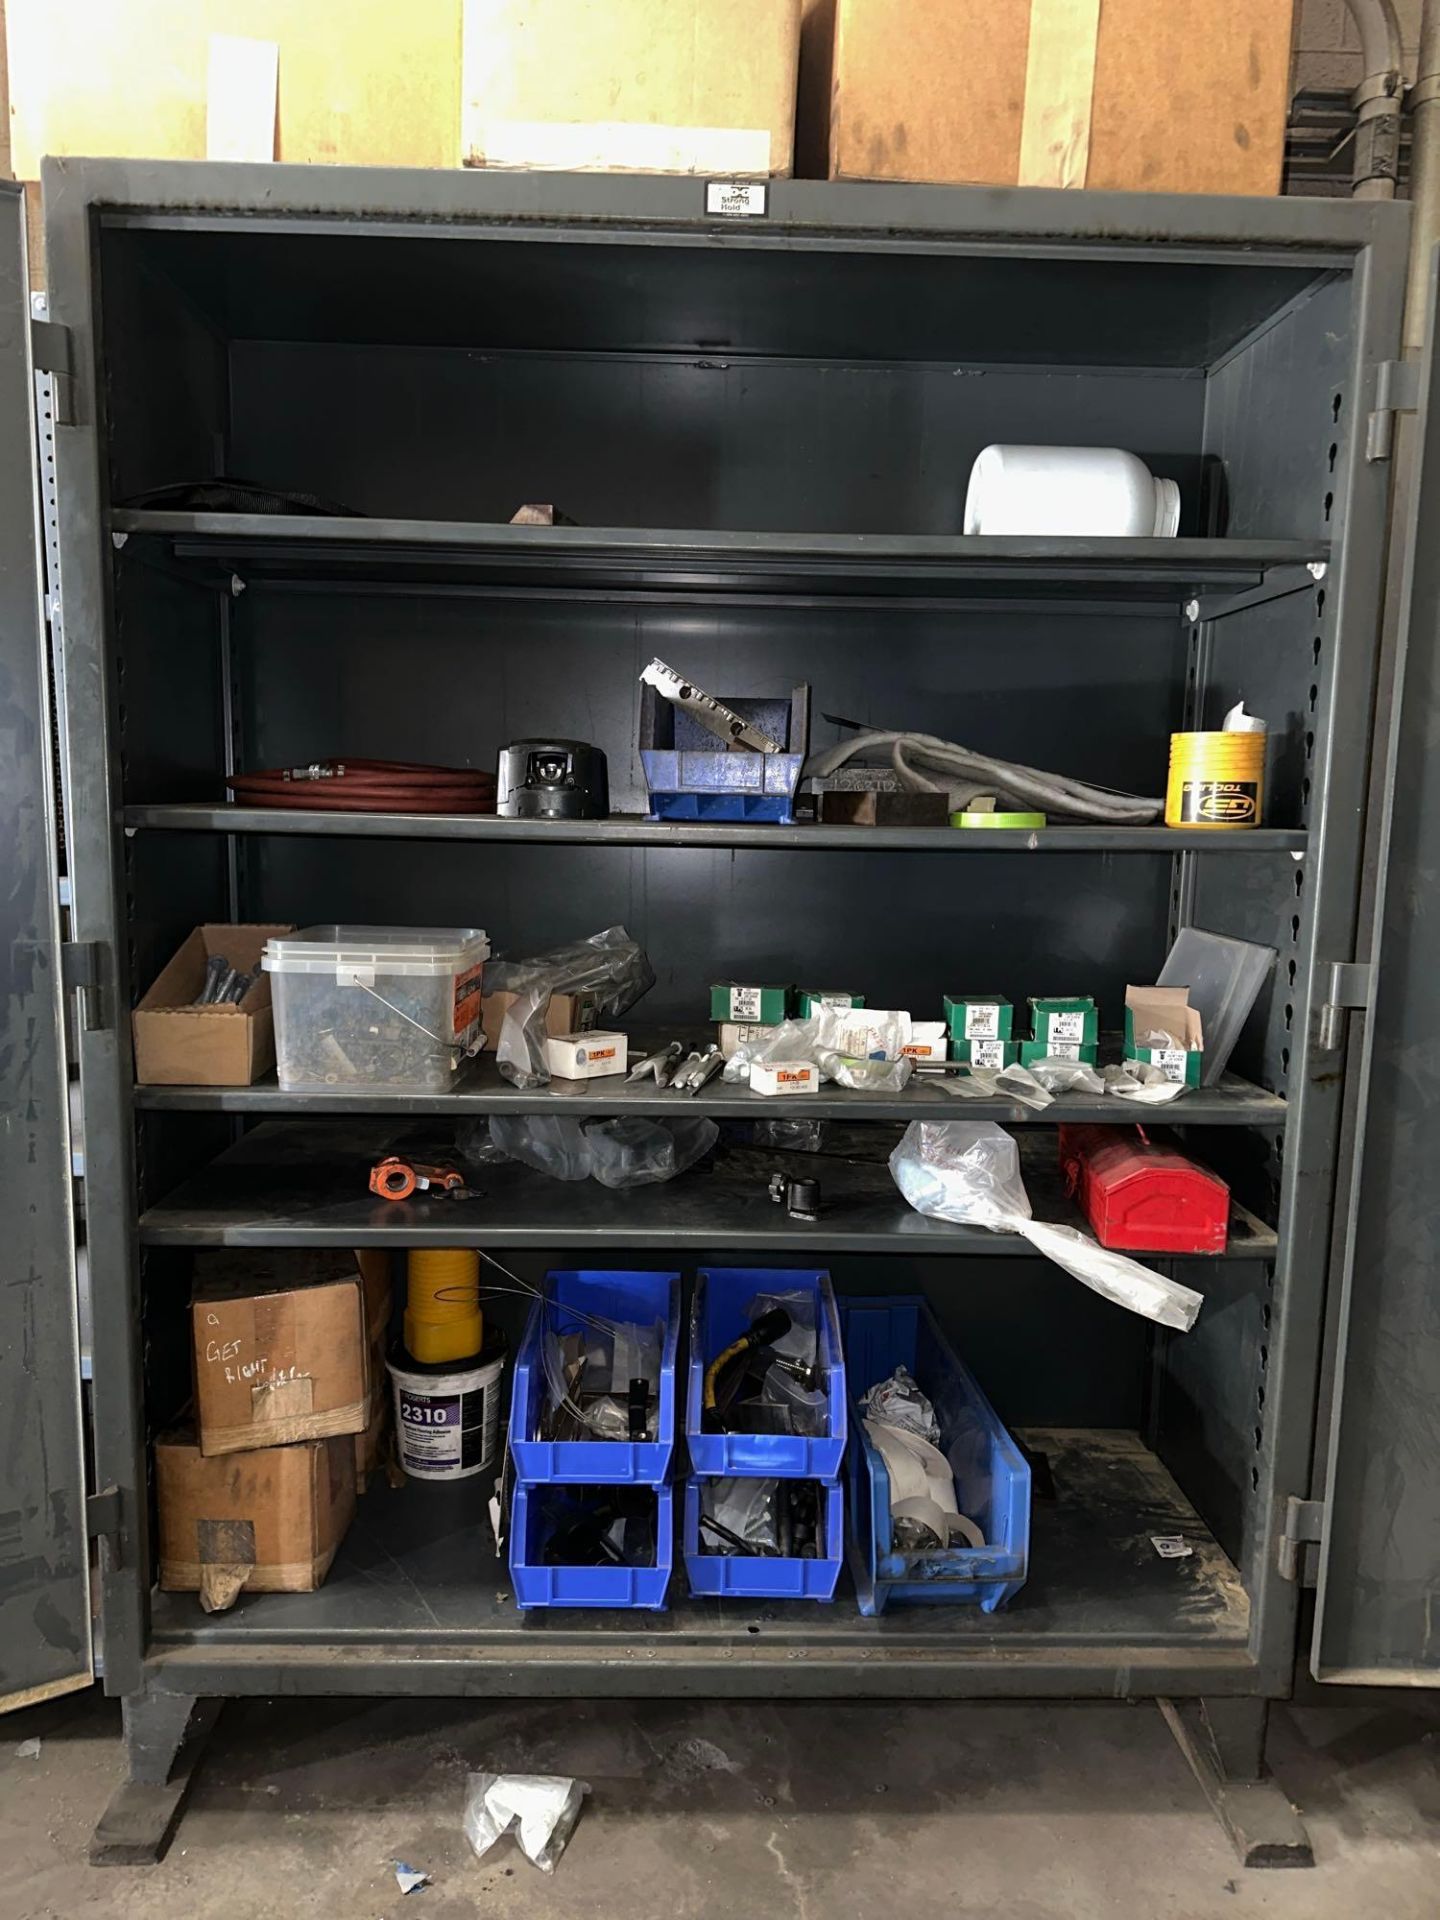 2 Door Steel Cabinet w/ Screws, Bolts, Miscellaneous Hardware & Organizers - Image 2 of 5